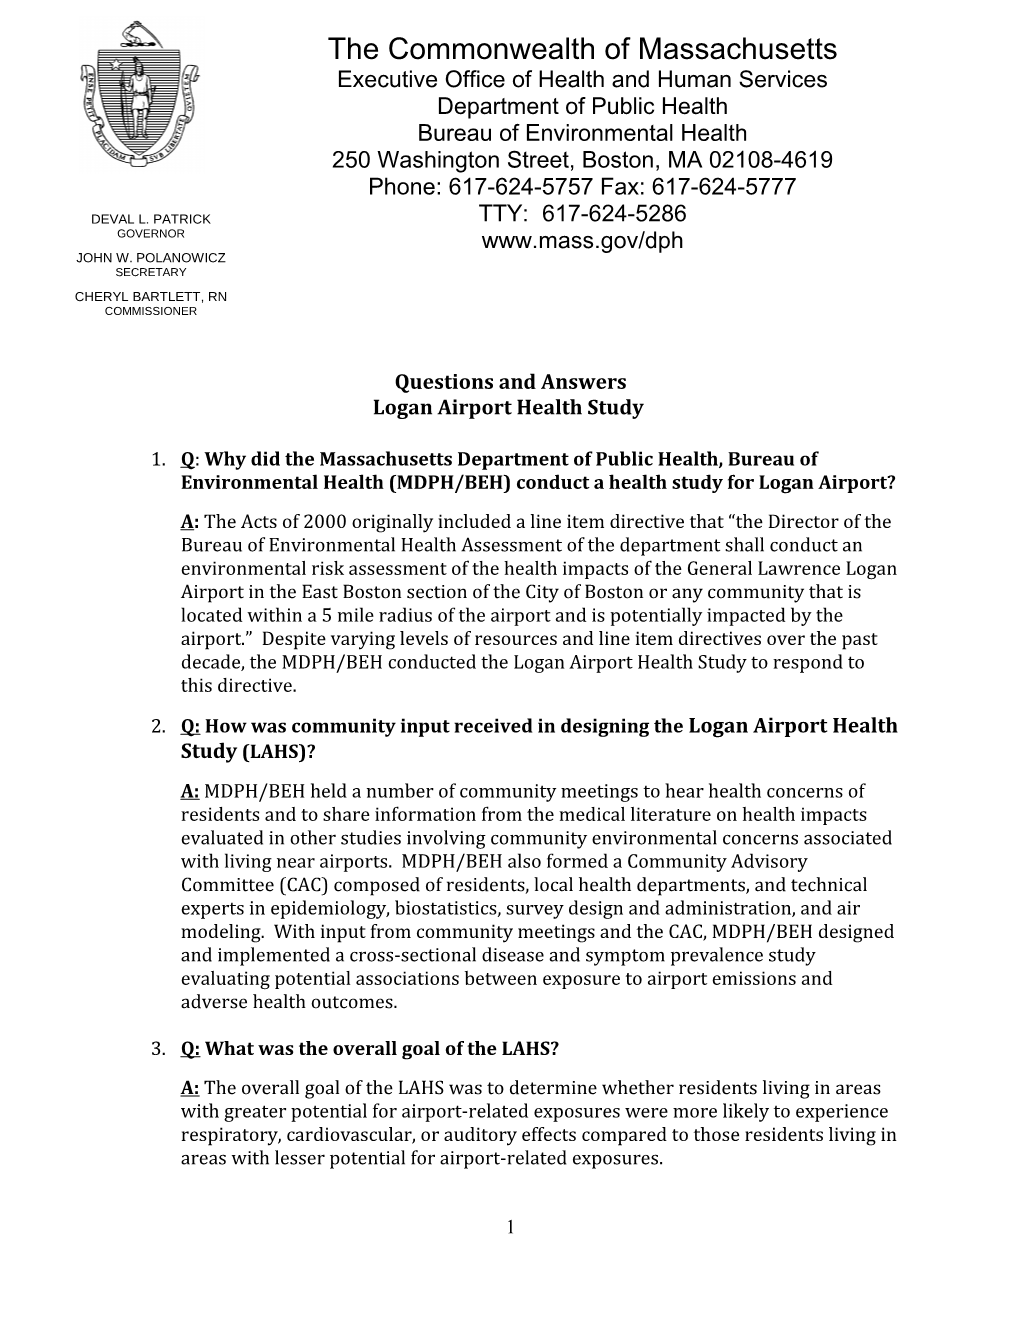 Questions and Answers Logan Airport Health Study